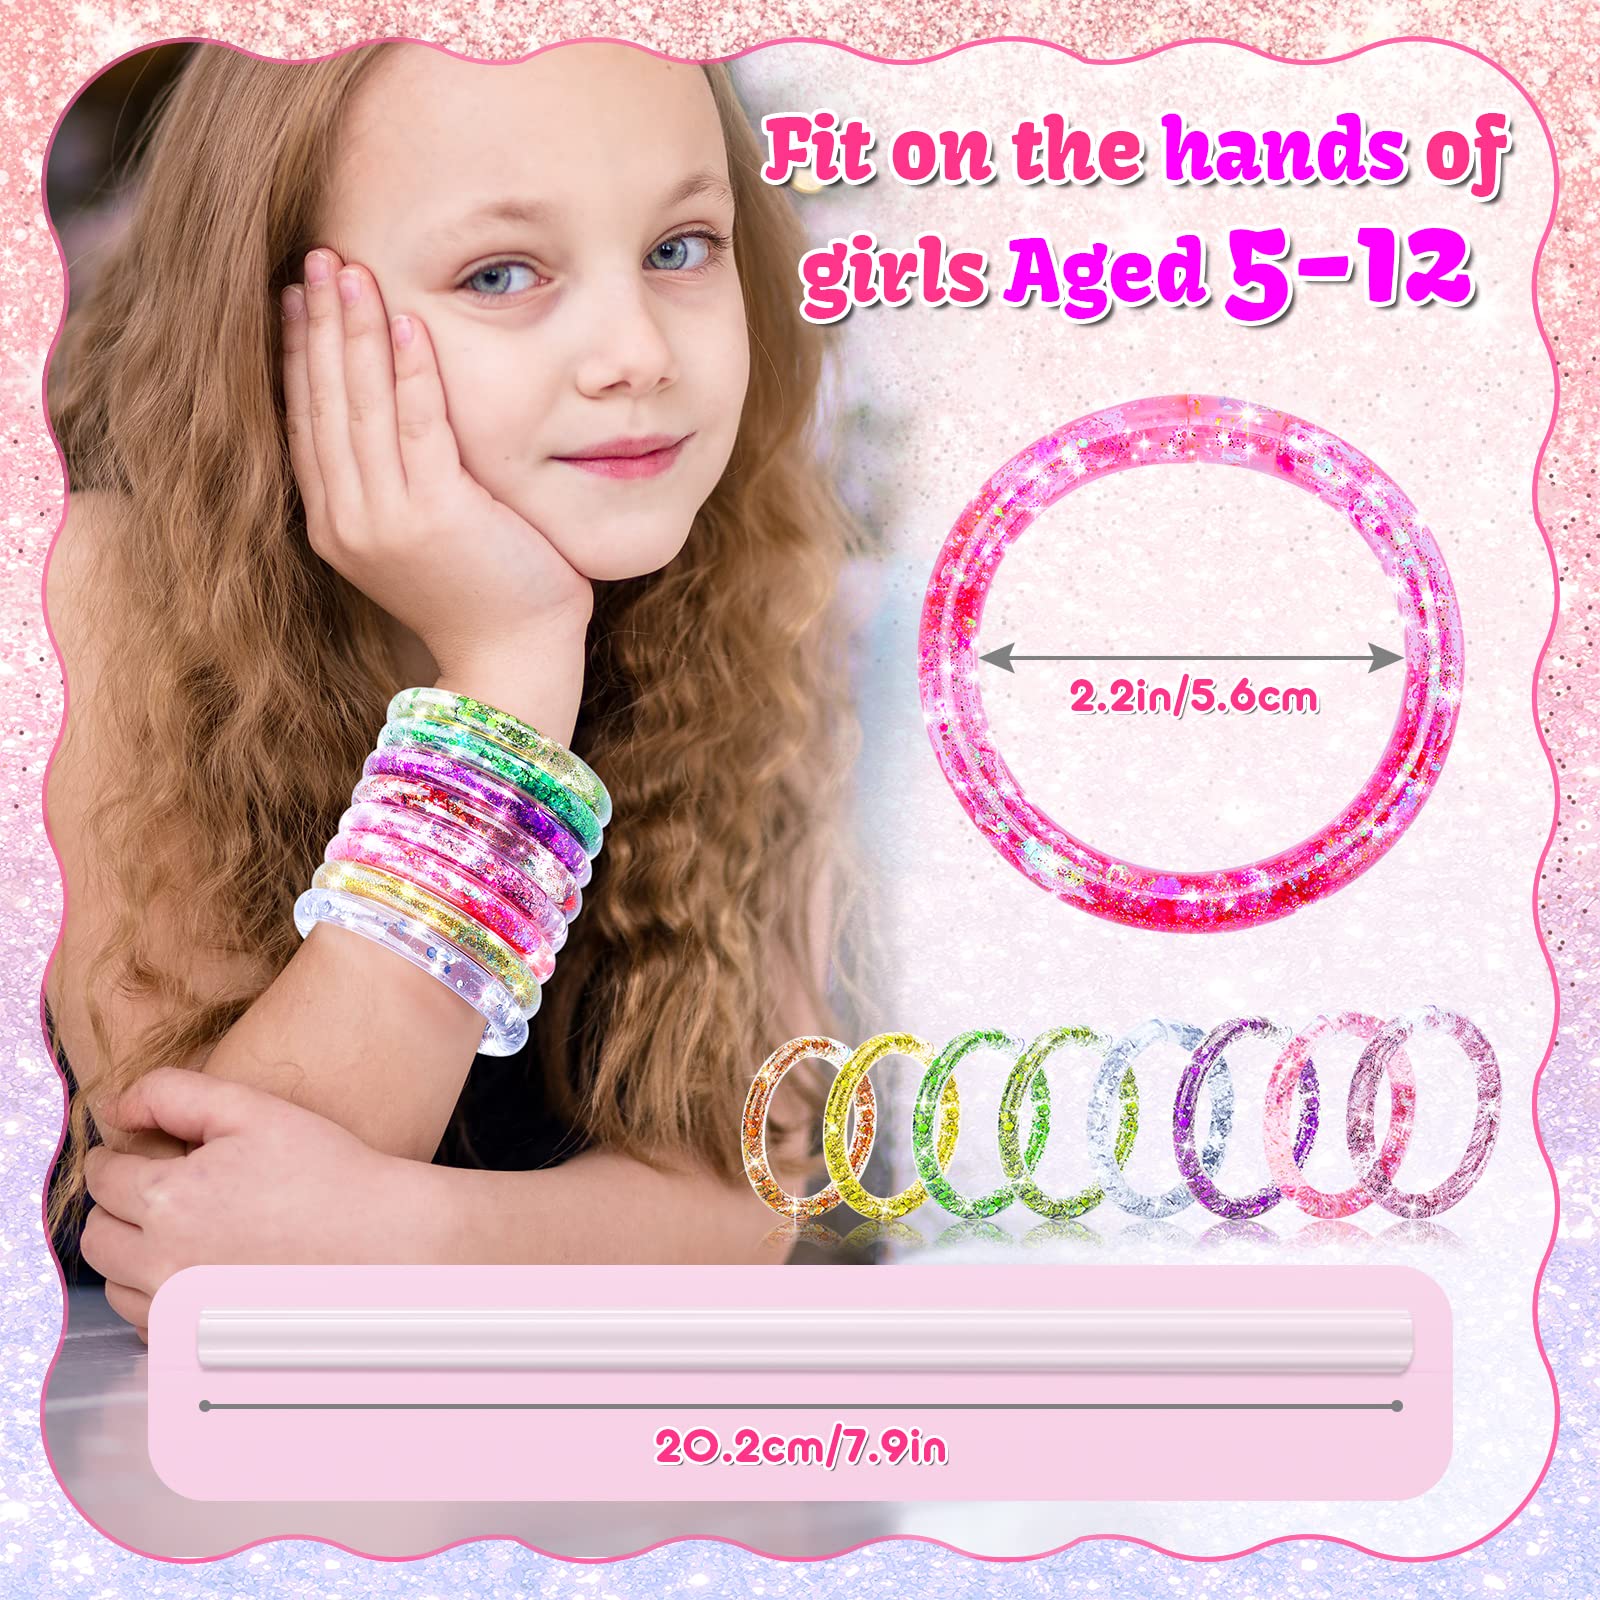 Pearoft Gift for 5 6 7 8 Year Old Girls Kids Craft Kits Girl Toy Age 6-8 Arts and Crafts for Kids Bracelet Making Craft for Girl Liquid Glitter